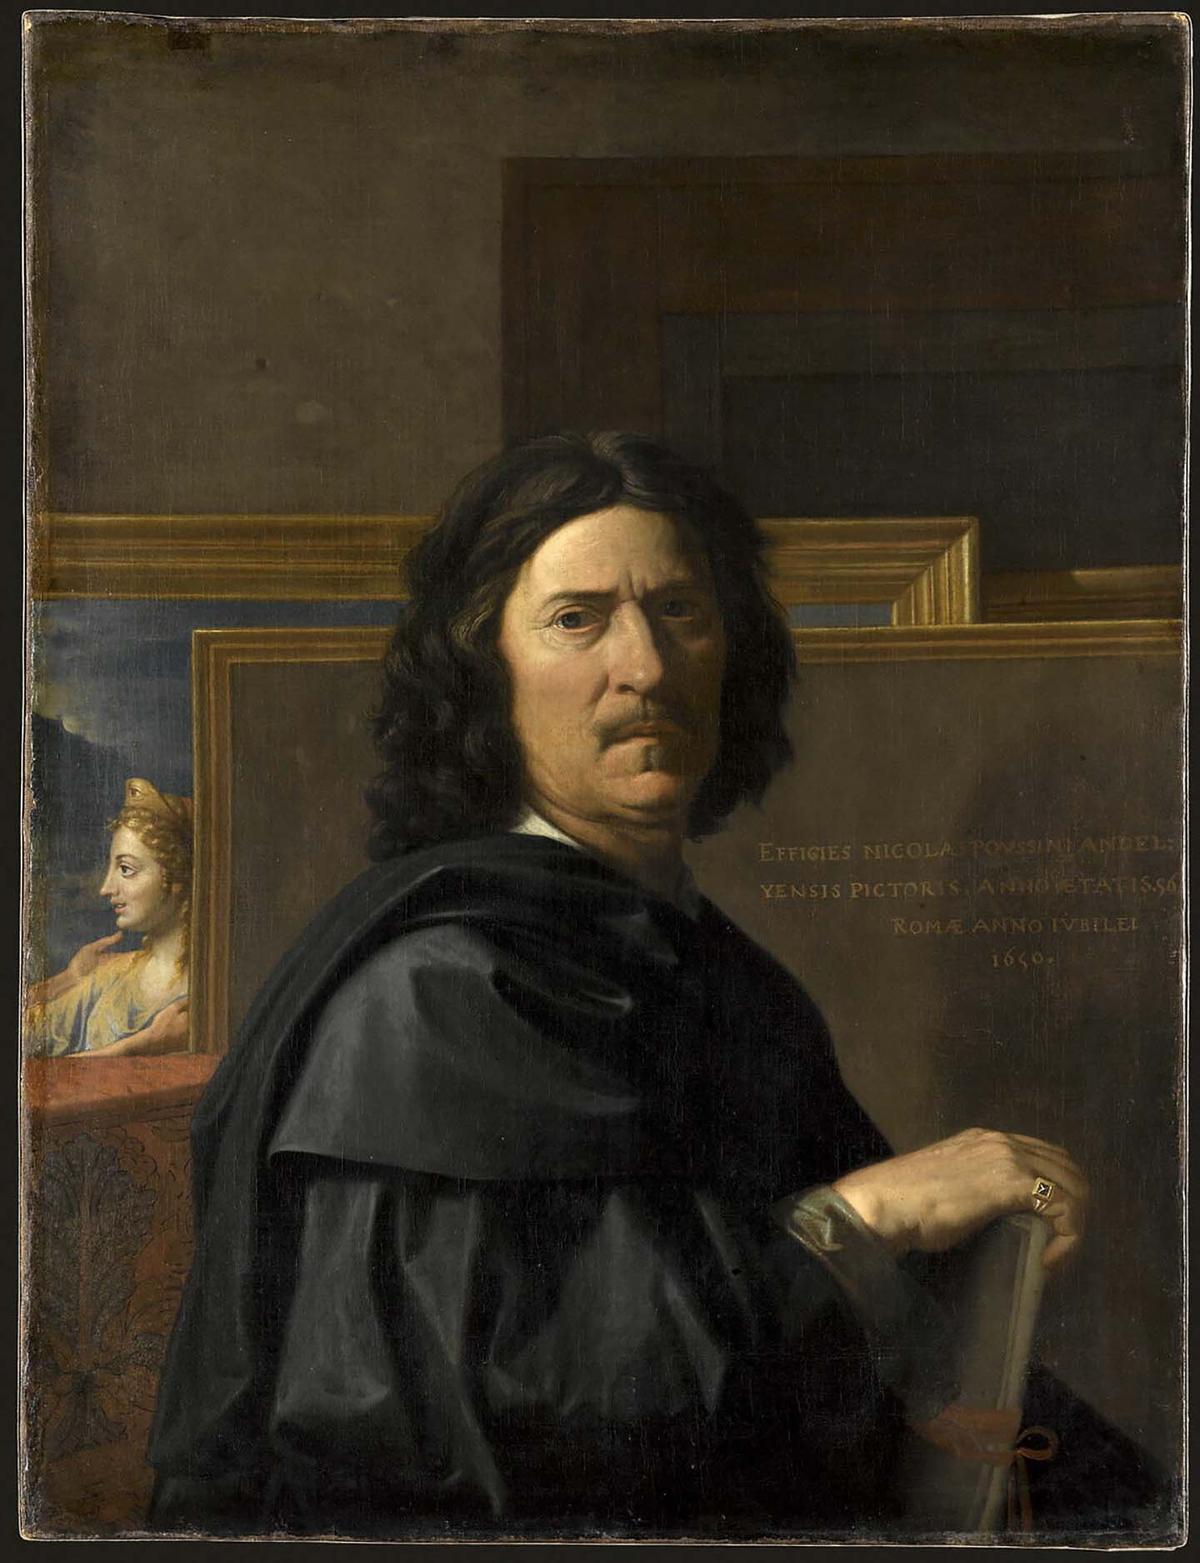 Self-portrait, 1650, by Nicolas Poussin. Oil on canvas; 30.7 inches by 37 inches. Louvre Museum. (Public Domain)